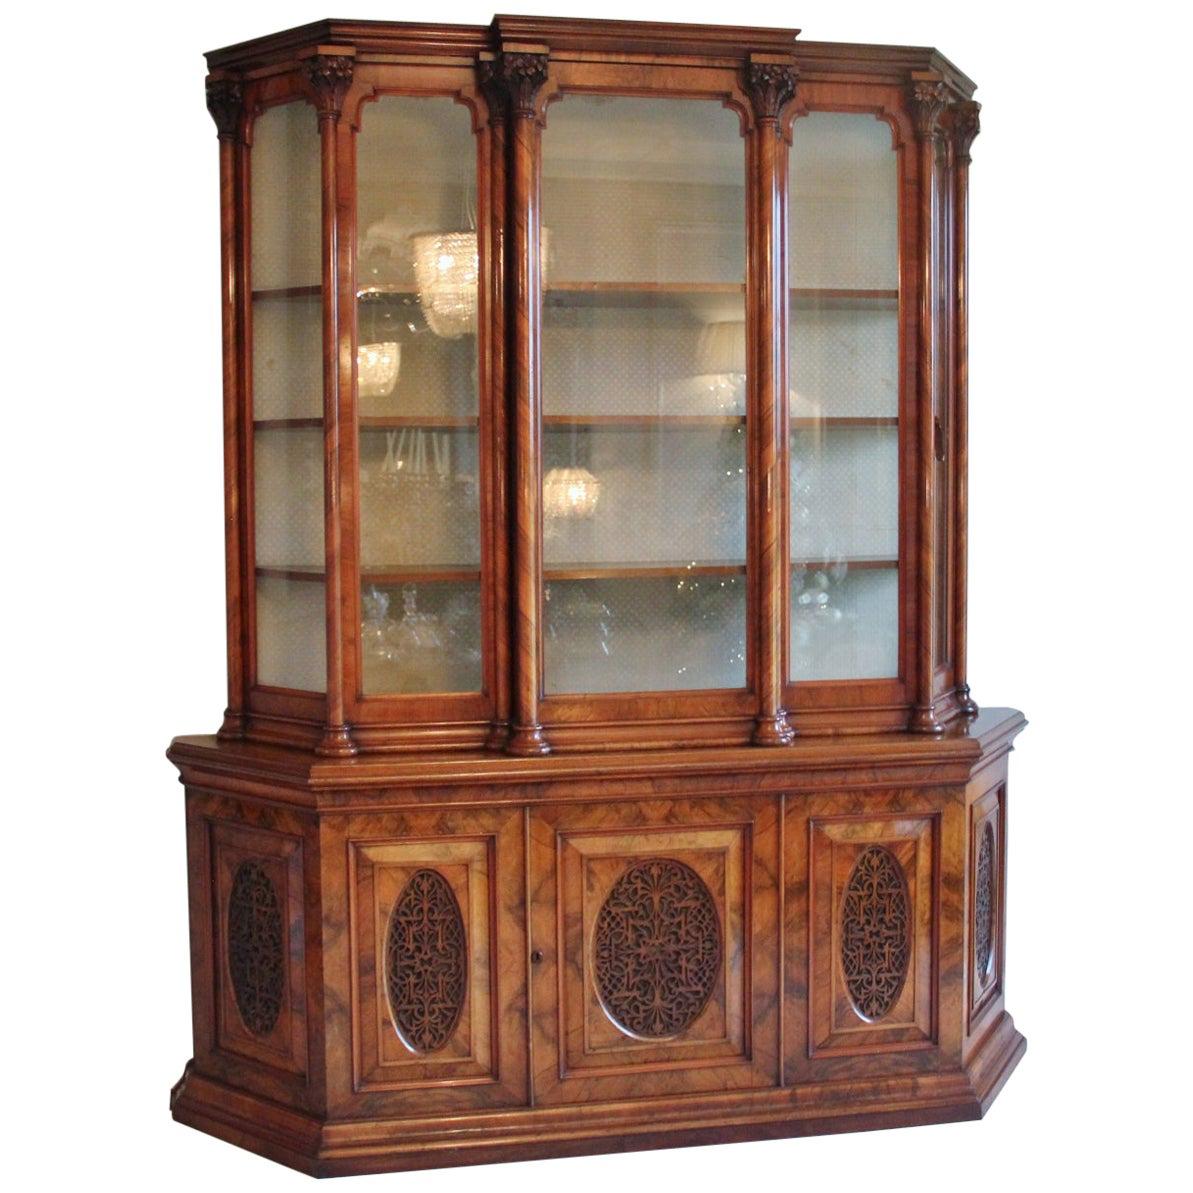 Exhibition Quality Antique Victorian Burr Walnut Carved Display Cabinet